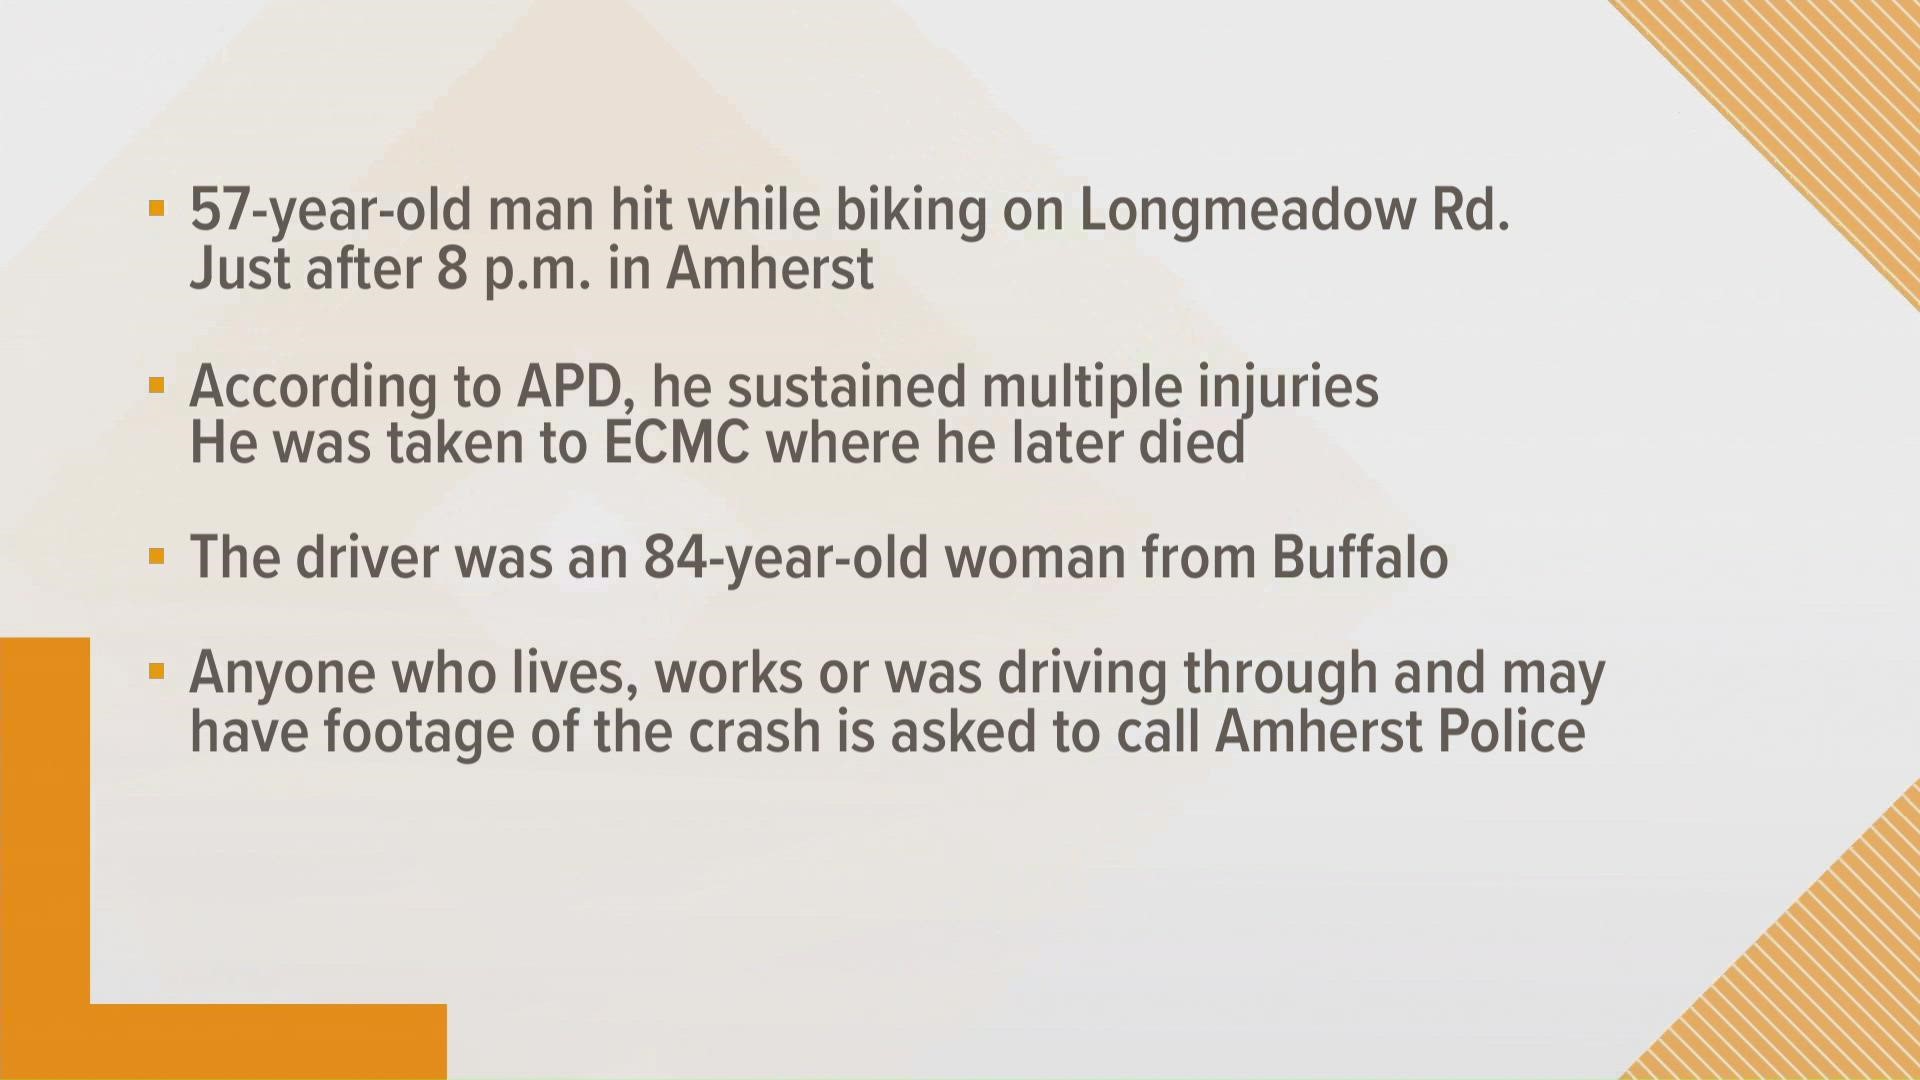 According to Amherst Police, a 57-year-old man was riding his bike on Longmeadow Road when he was hit by a car just after 8 p.m.